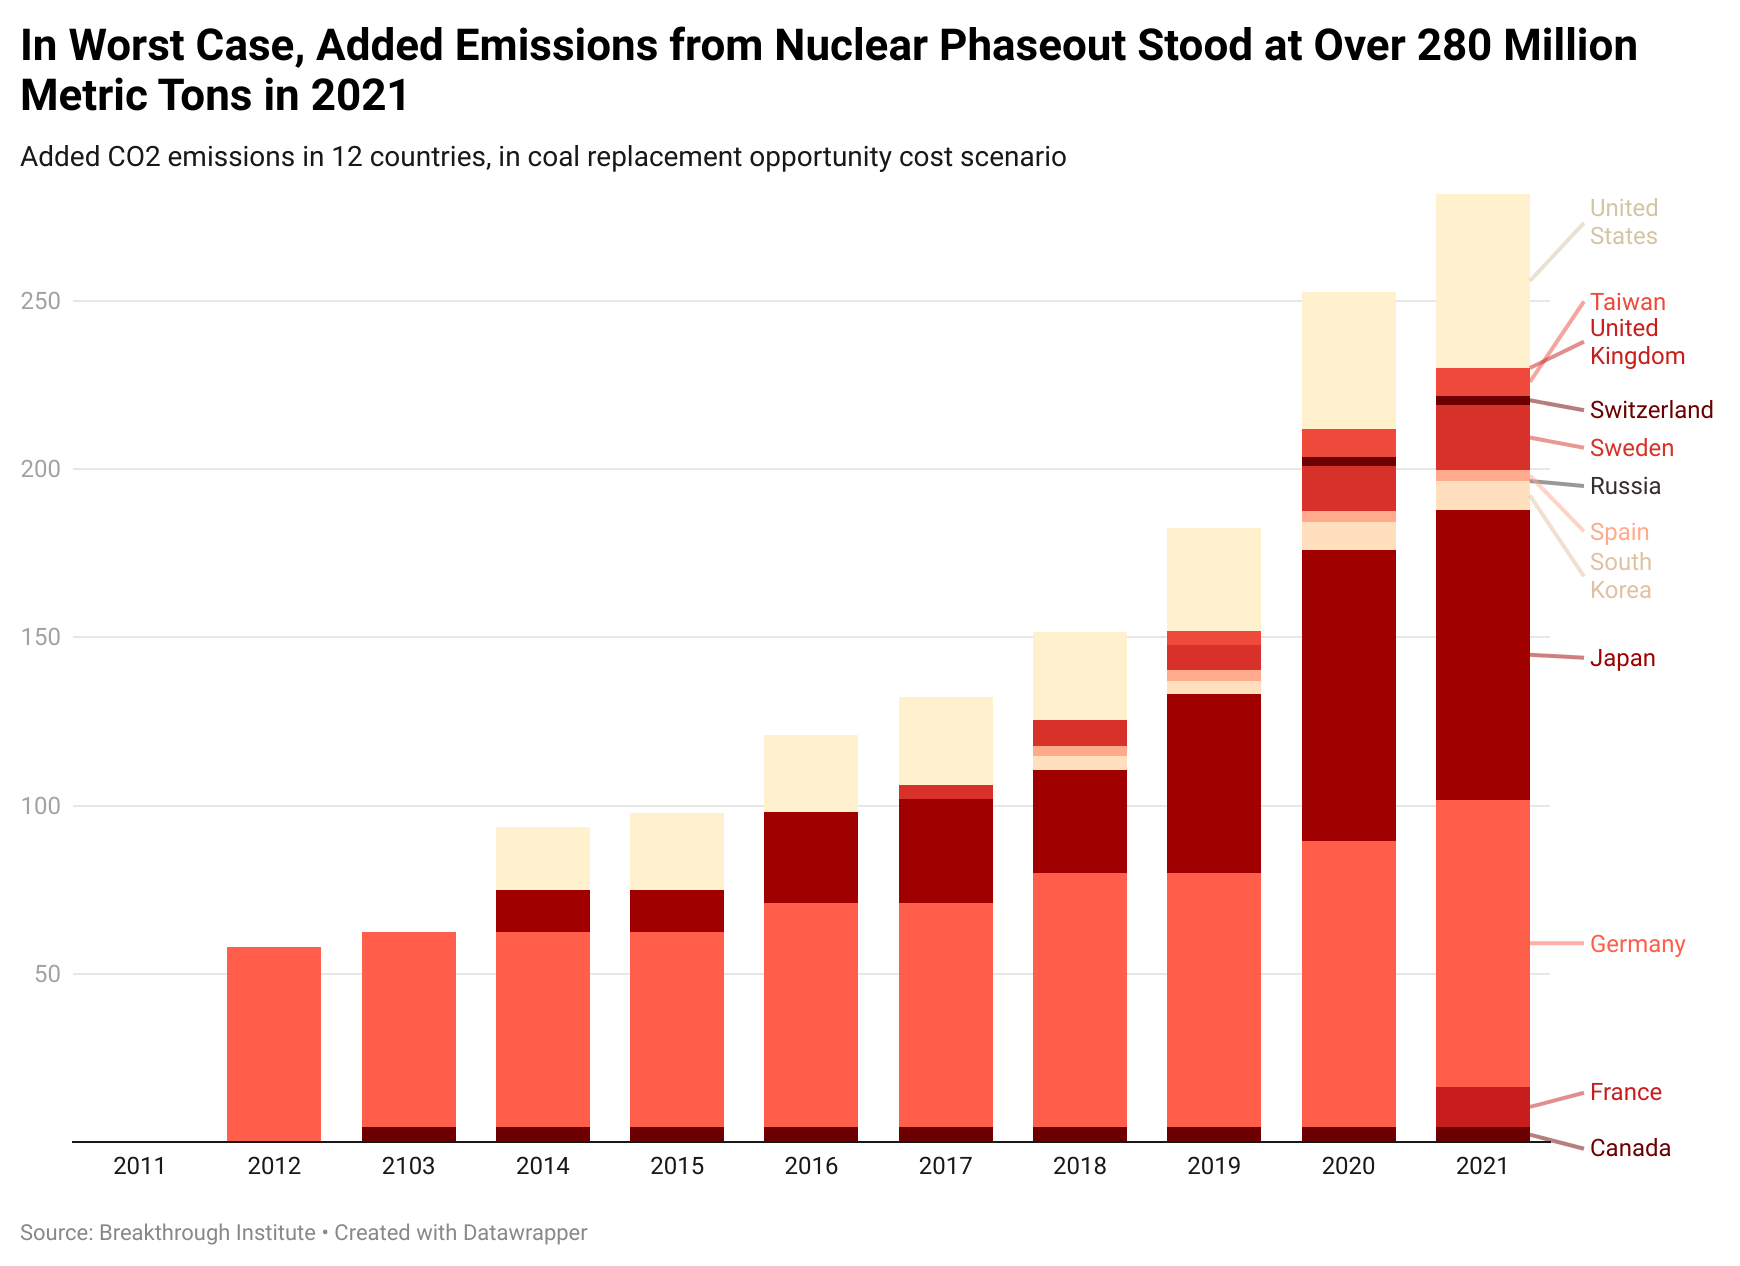 In Worst Case, Added Emissions from Nuclear Phaseout Stood at Over 280 Million Metric Tons in 2021